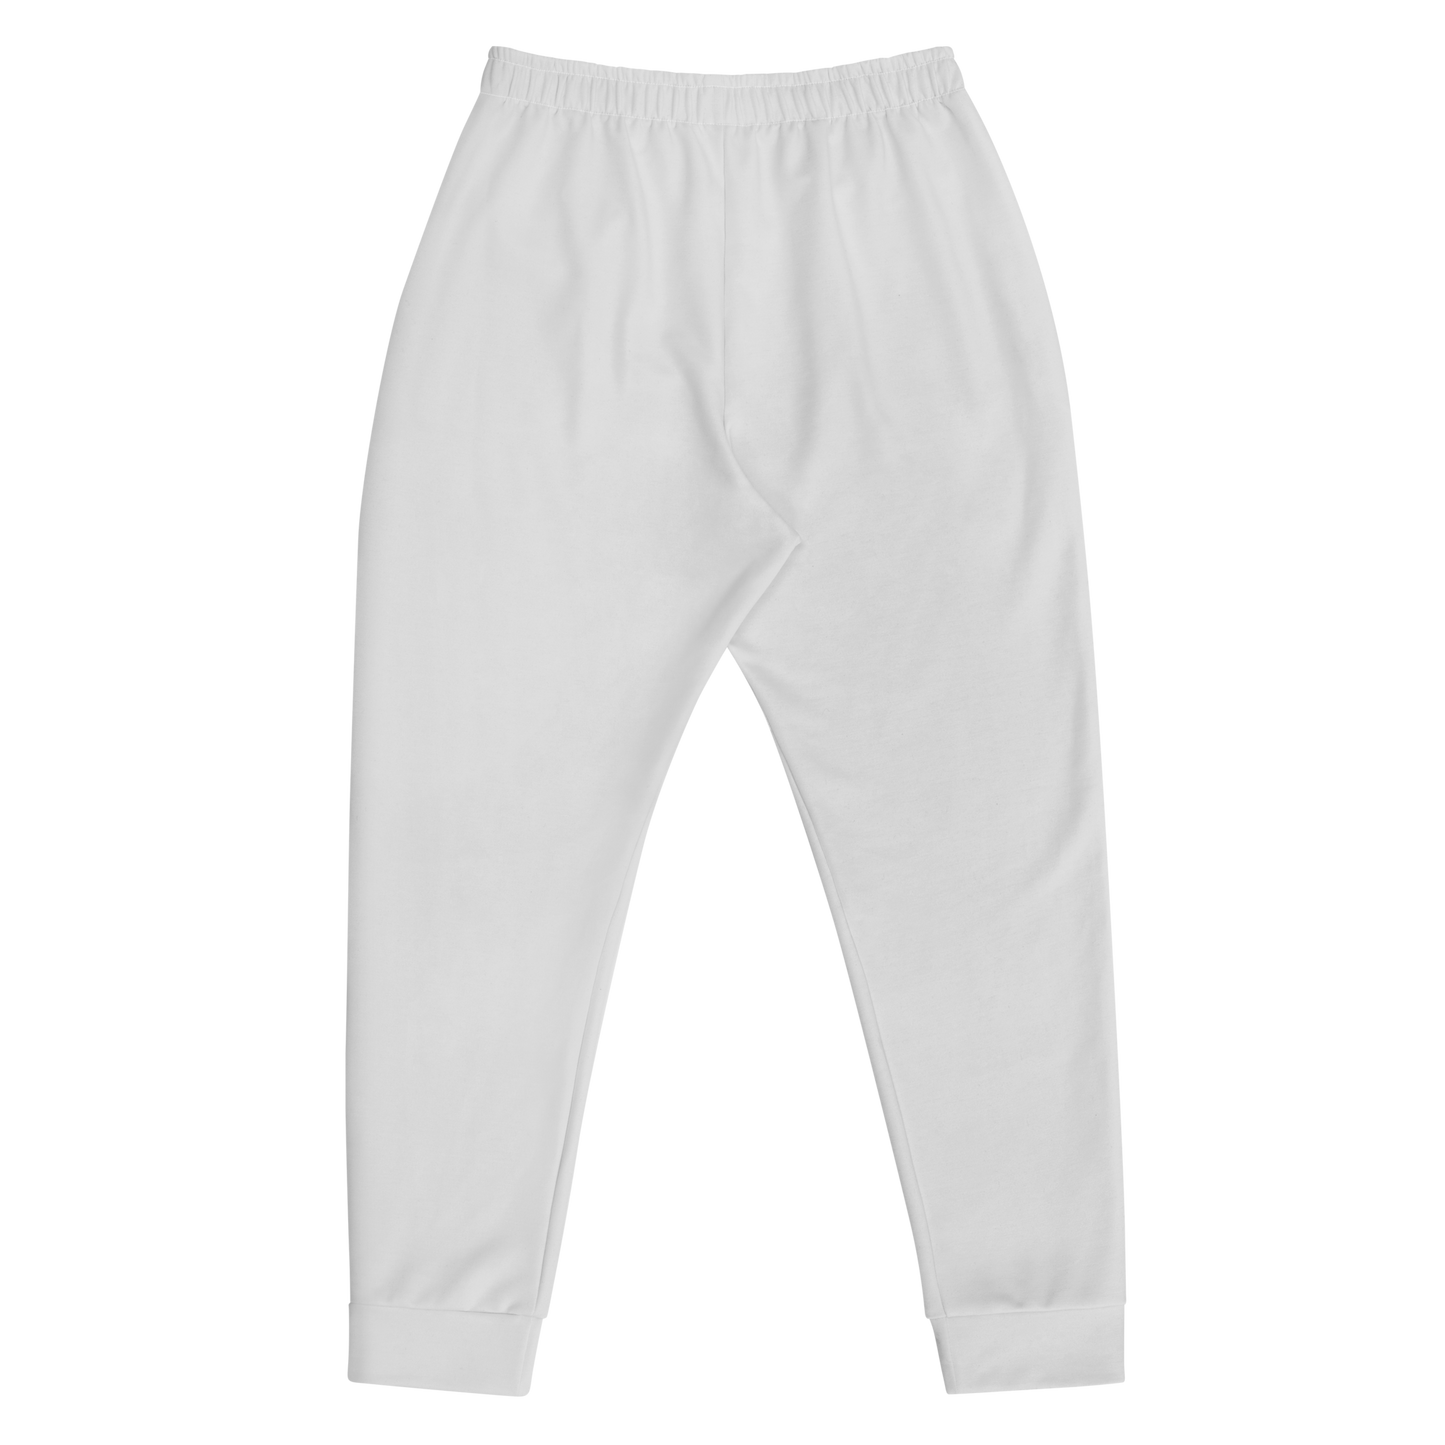 HORVATH JOGGERS